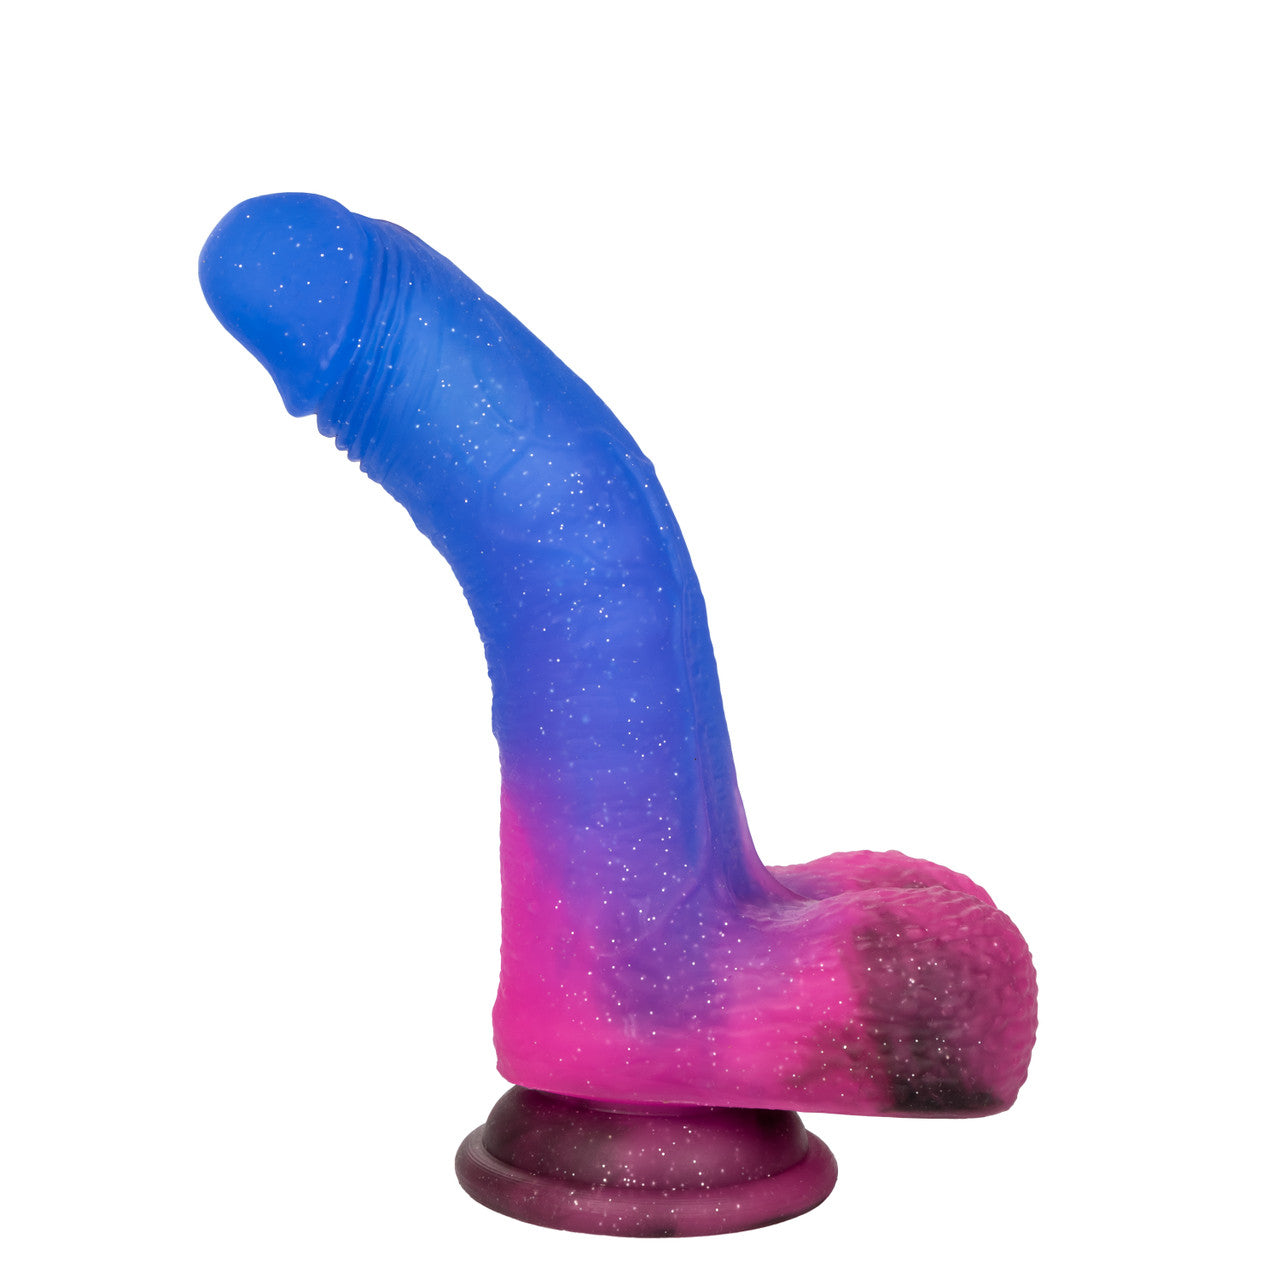 Blue to Pink ombre glitter finish dong with balls and suction cup base. Life-like shaft texture and realistic tip head. Shaft bent upward and holding position.